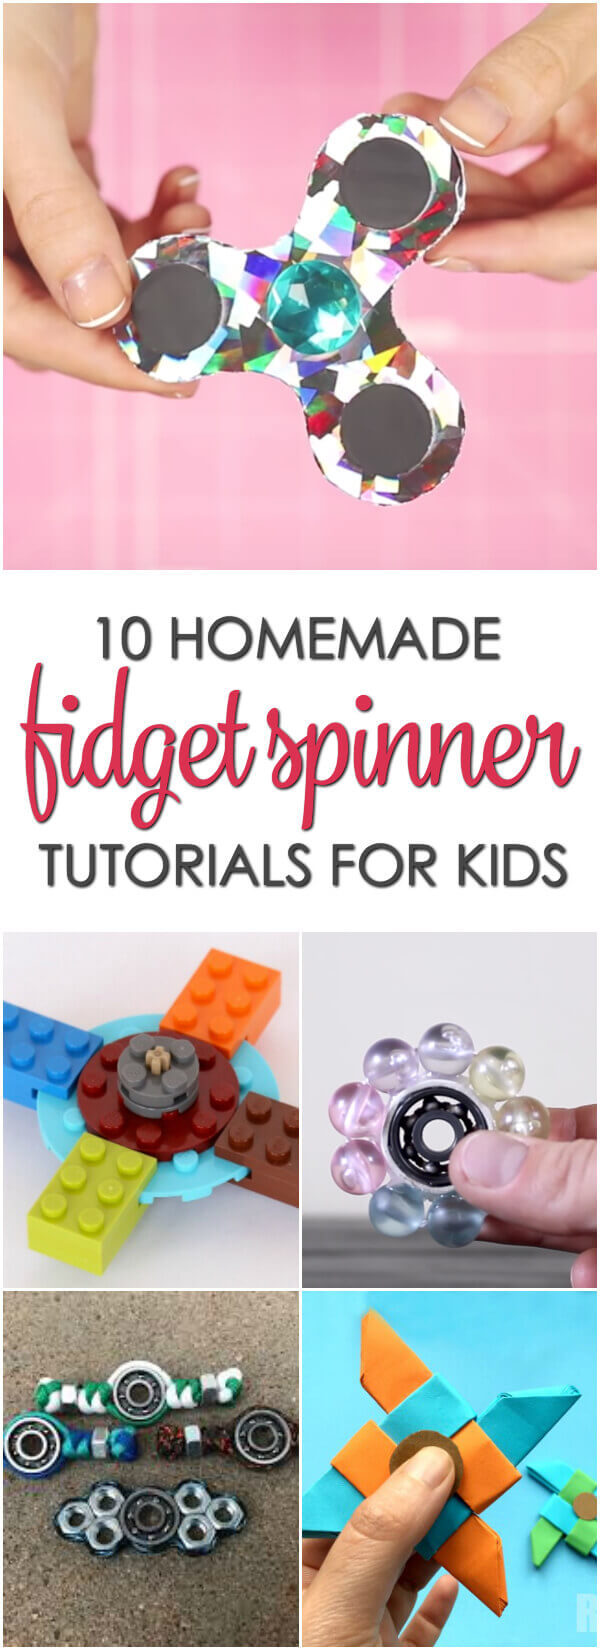 10 Homemade Fidget Spinners Your Kids Will Love - get all of the tutorials here